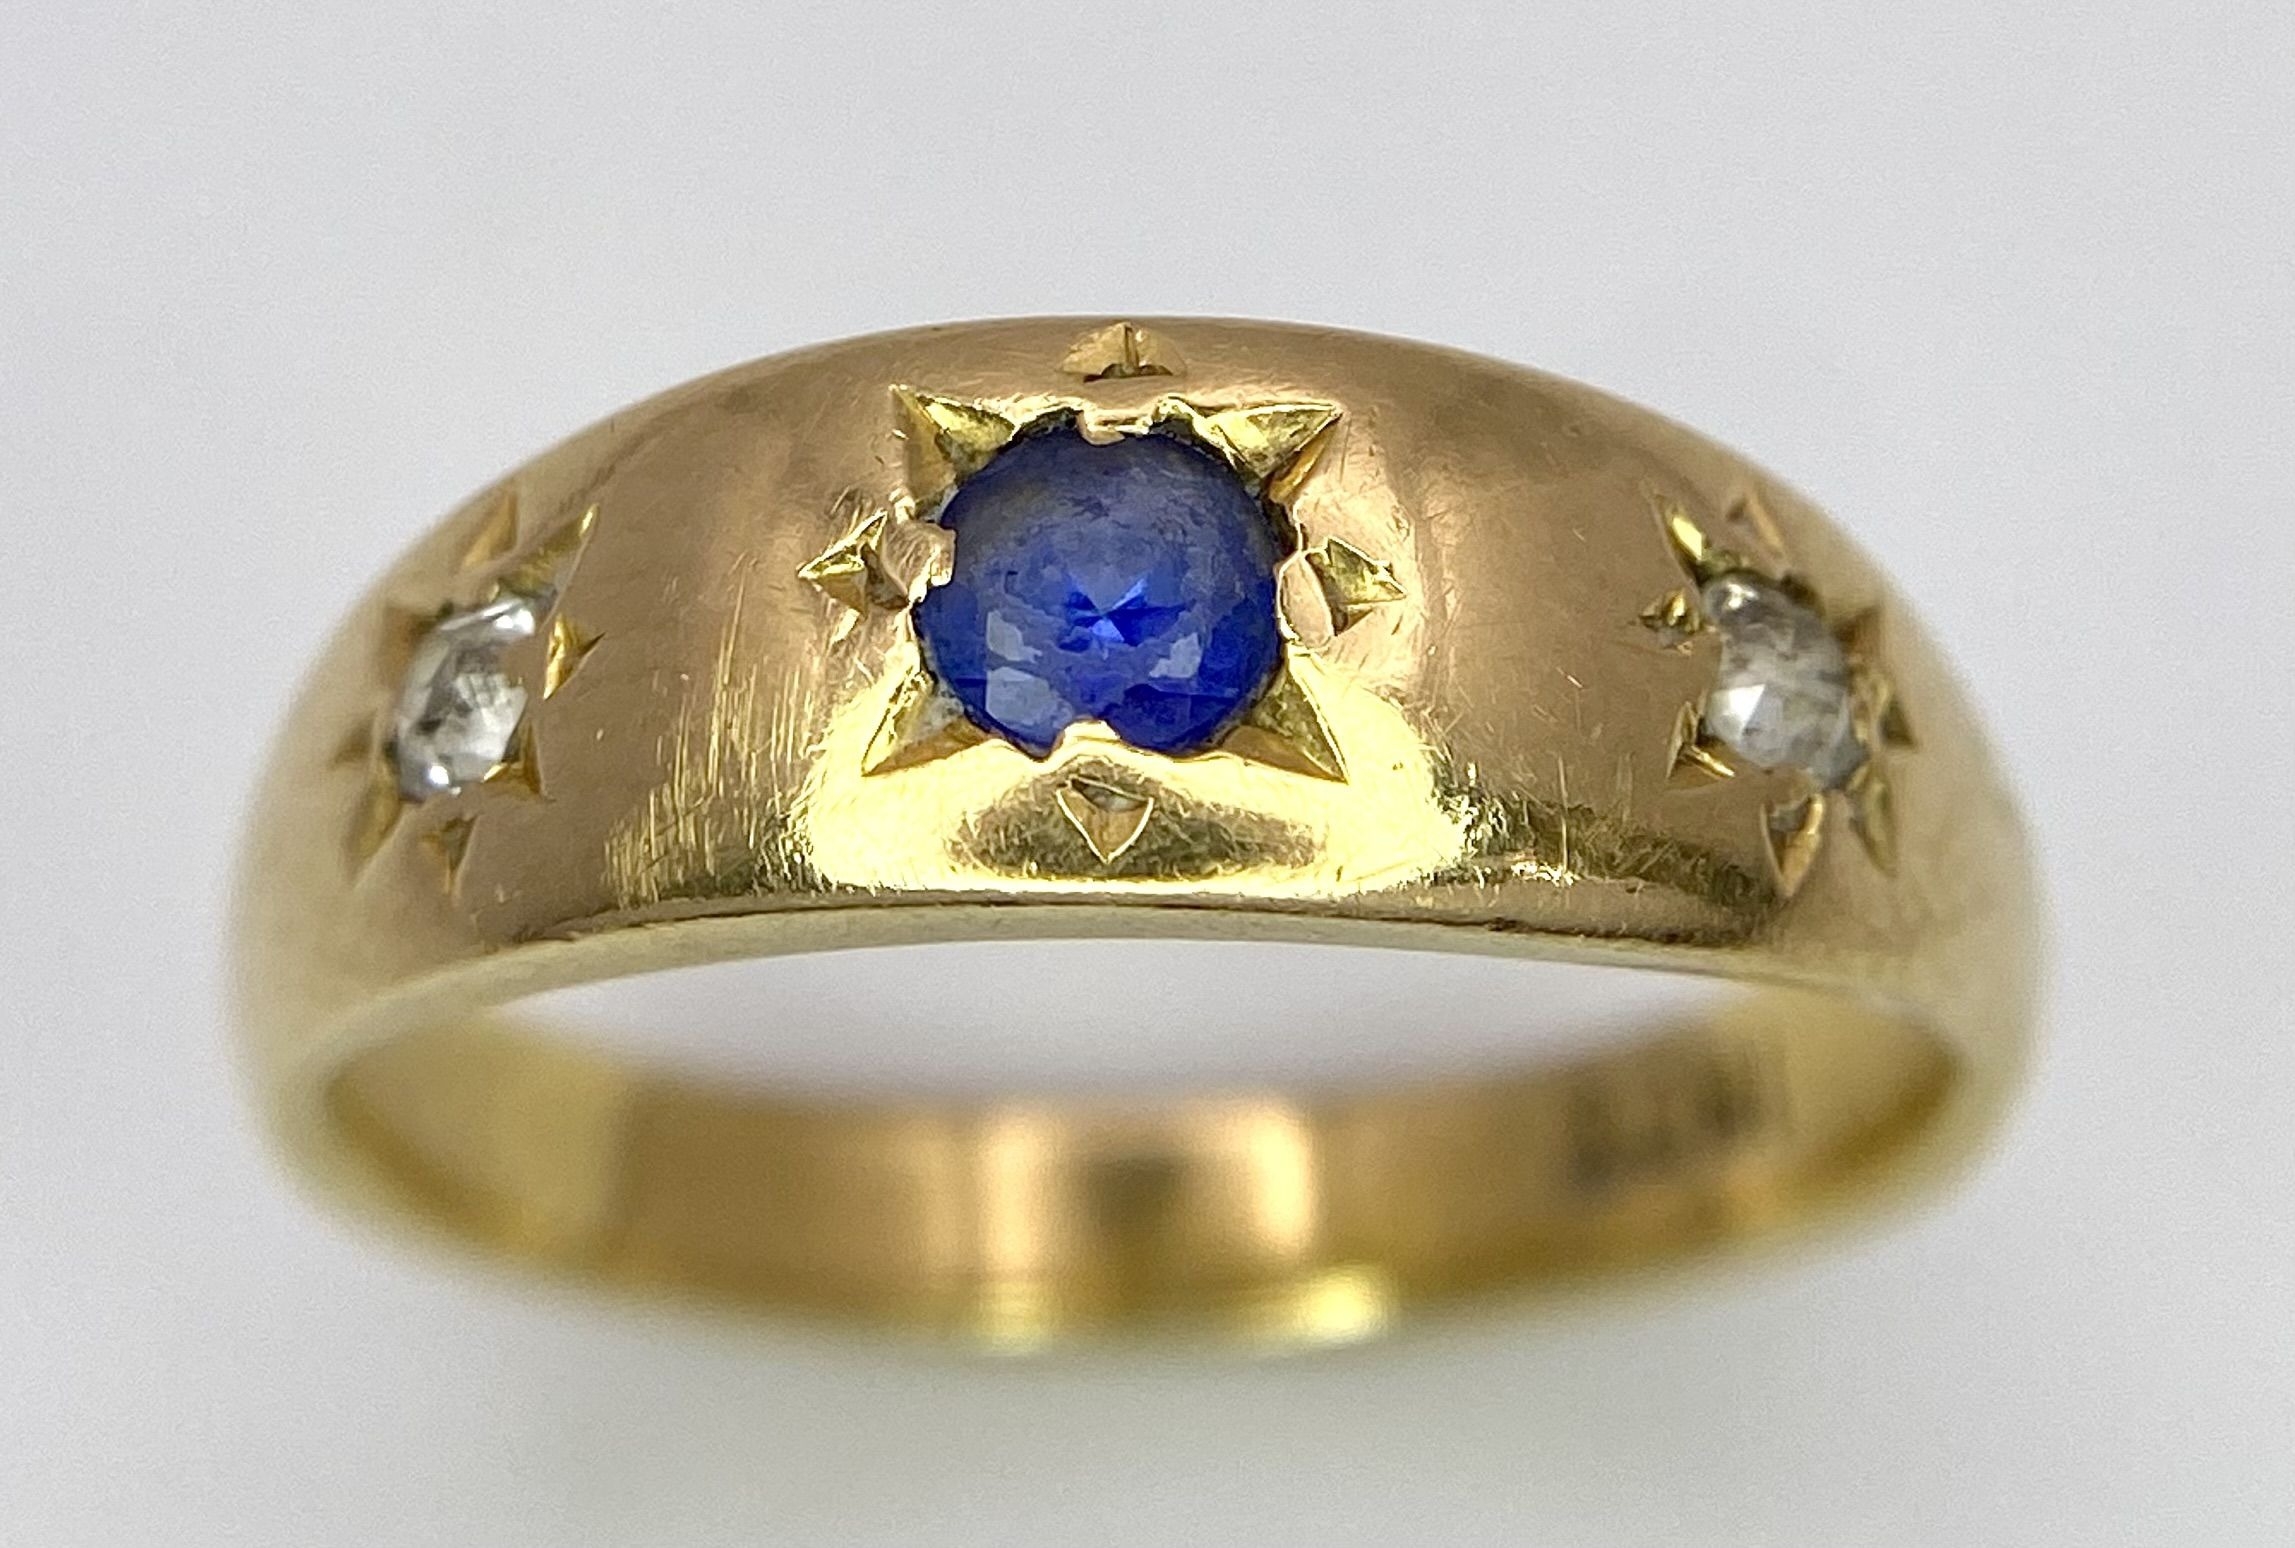 A Vintage 18K Yellow Gold Diamond and Sapphire Gypsy Ring. Size L. 4.6g total weight. - Image 3 of 6